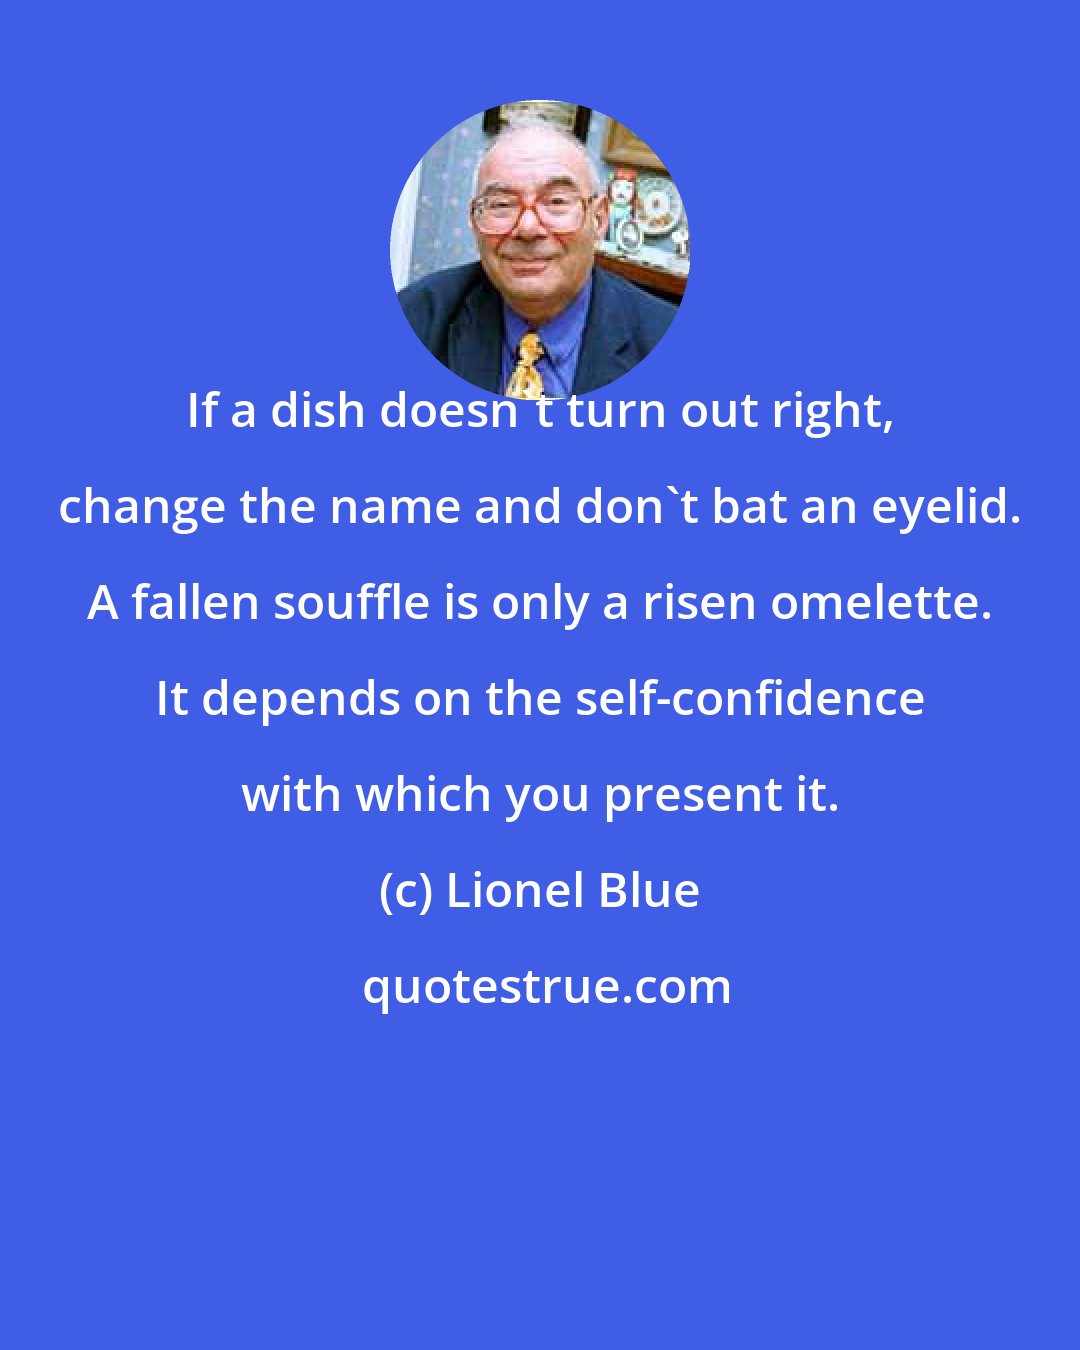 Lionel Blue: If a dish doesn't turn out right, change the name and don't bat an eyelid. A fallen souffle is only a risen omelette. It depends on the self-confidence with which you present it.